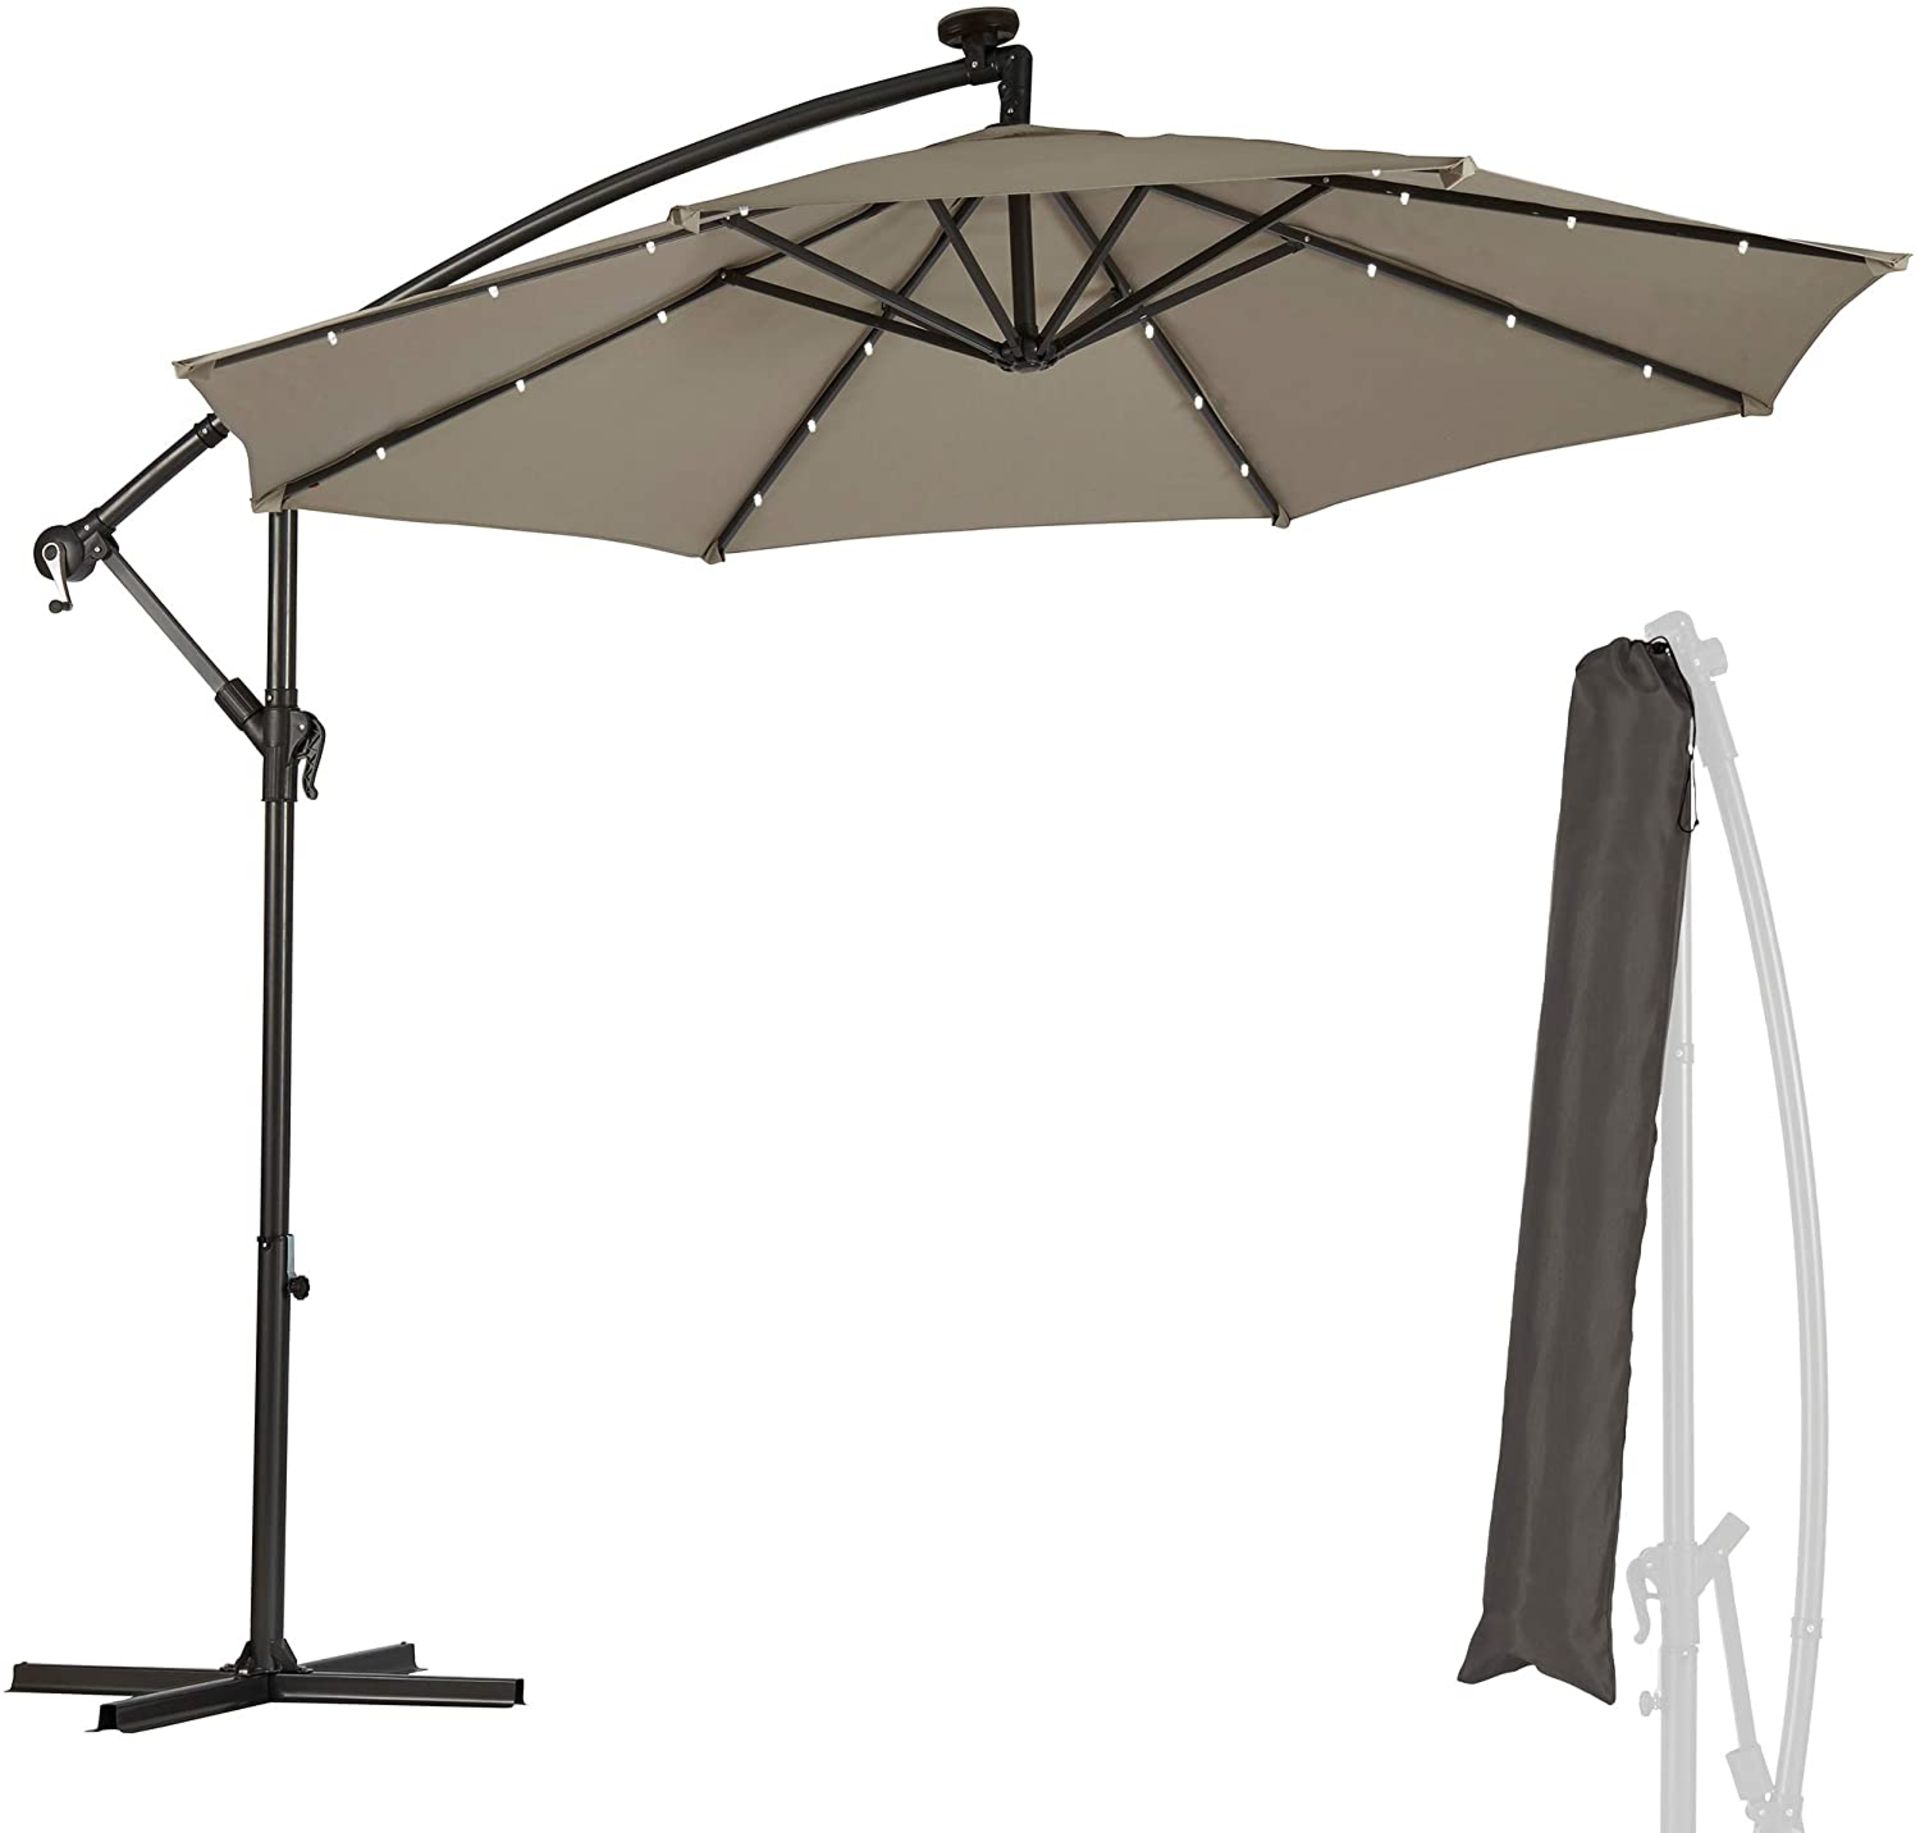 New Boxed - 2.7M GARDEN PARASOL WITH DIMMABLE BATTERY-POWERED LED LIGHTS. (REF335-ROW6) Enjoy